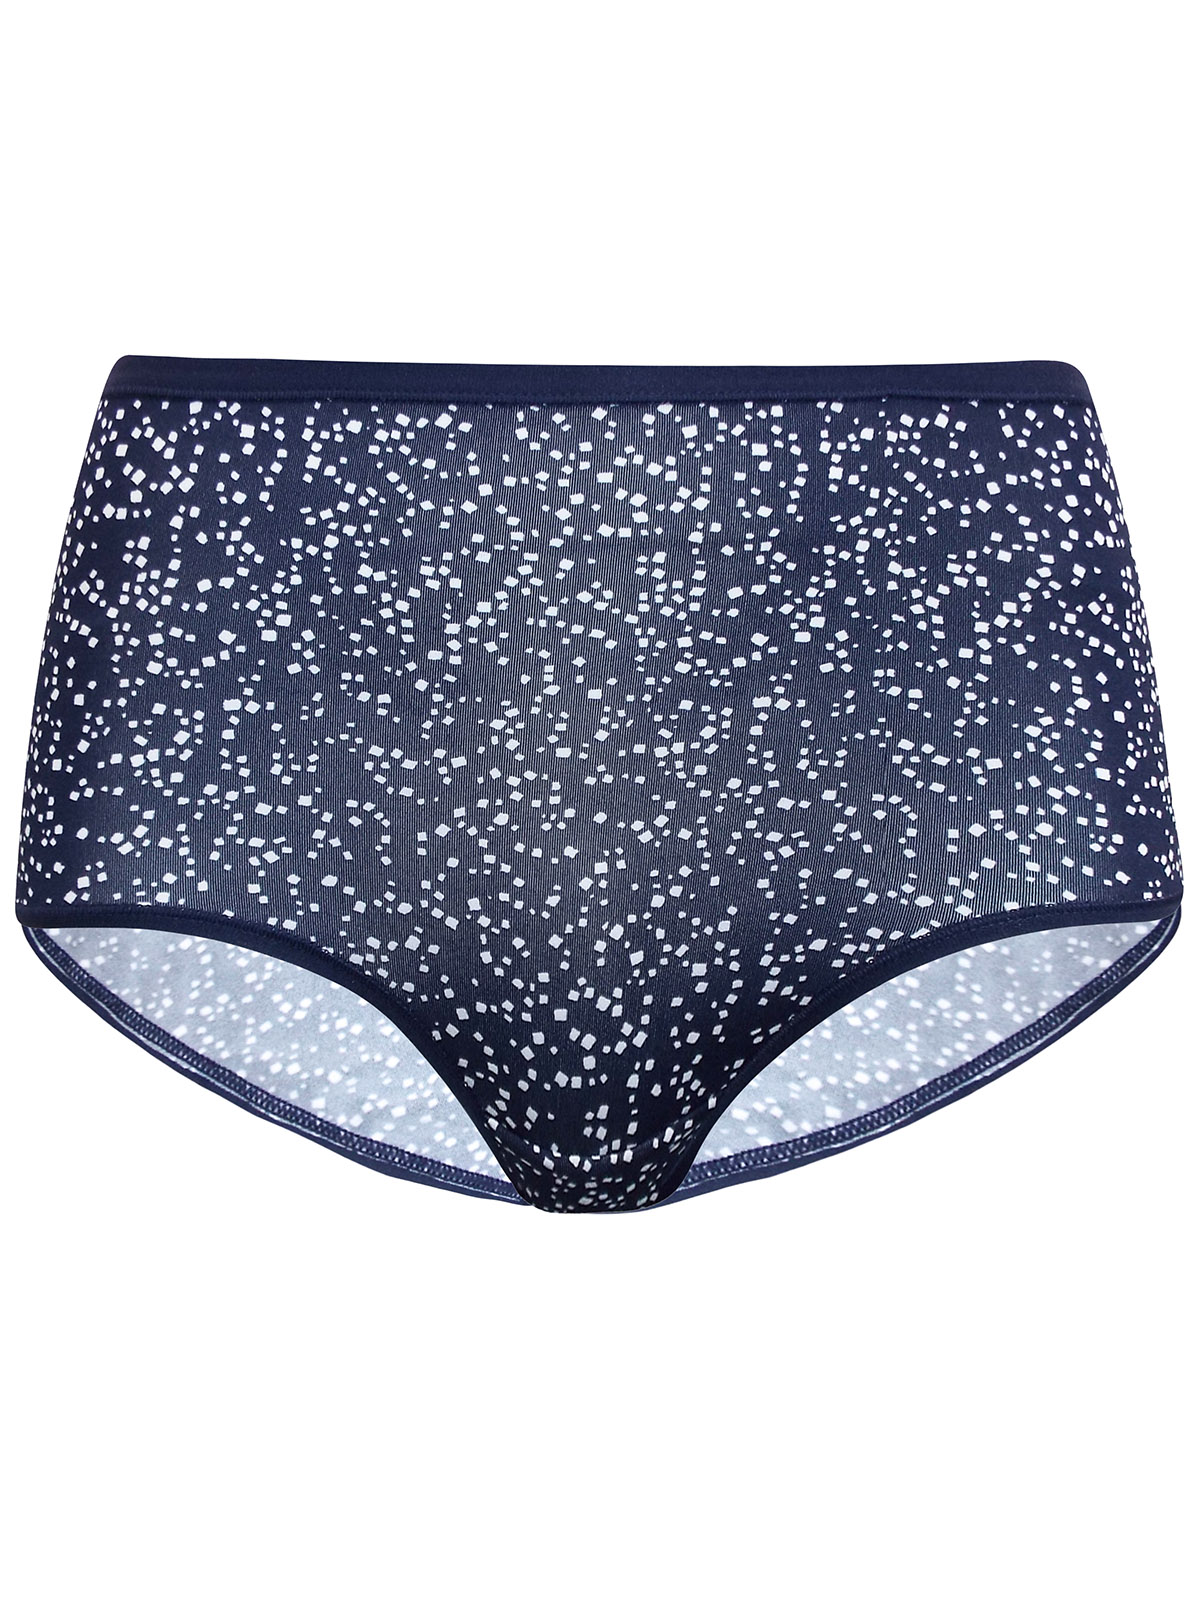 Marks and Spencer - - M&5 NAVY Spot Print Midi Knickers - Size 6 to 18